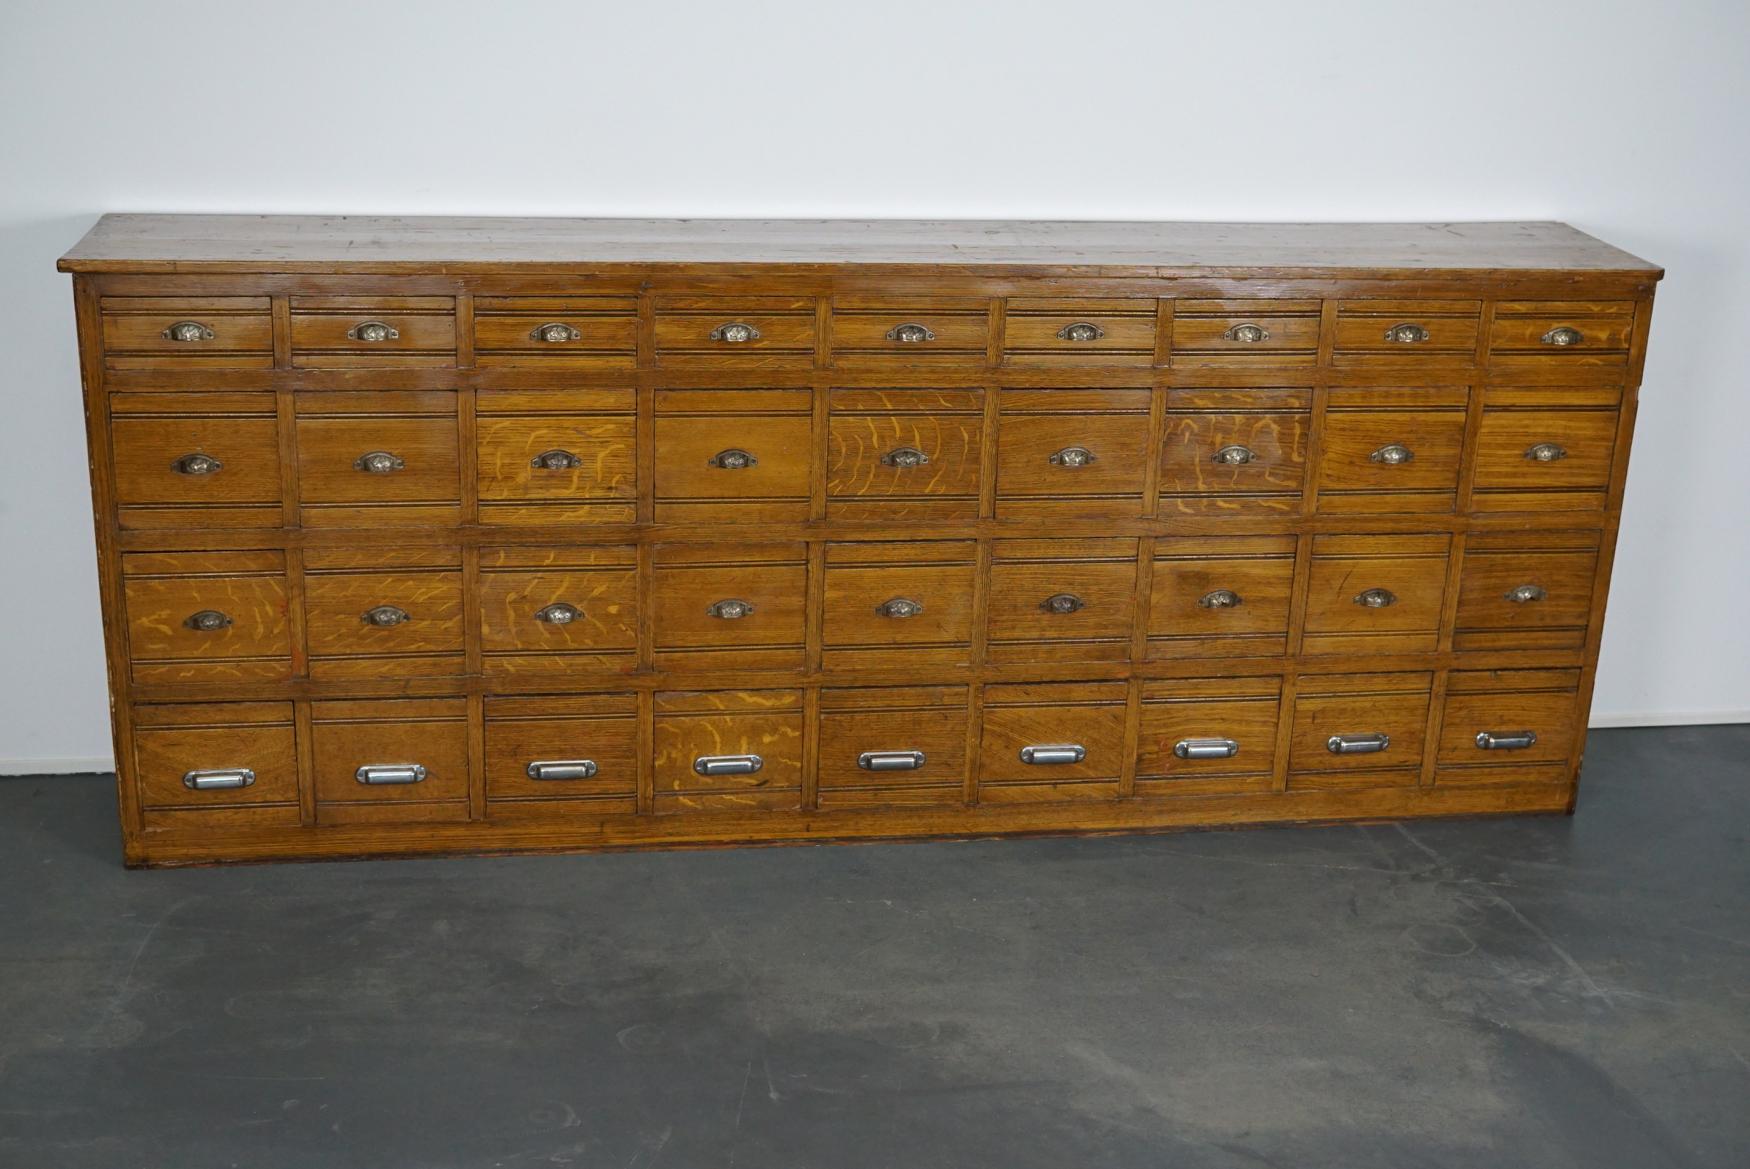 This cabinet was designed and made in the early 20th century. It features two sizes of drawers with amazing pulls. The interior dimensions of the drawers are: small 29 x 19.5 x 8.5 cm and large 29 x 19.5 x 18 cm. The cabinet is made from pine but